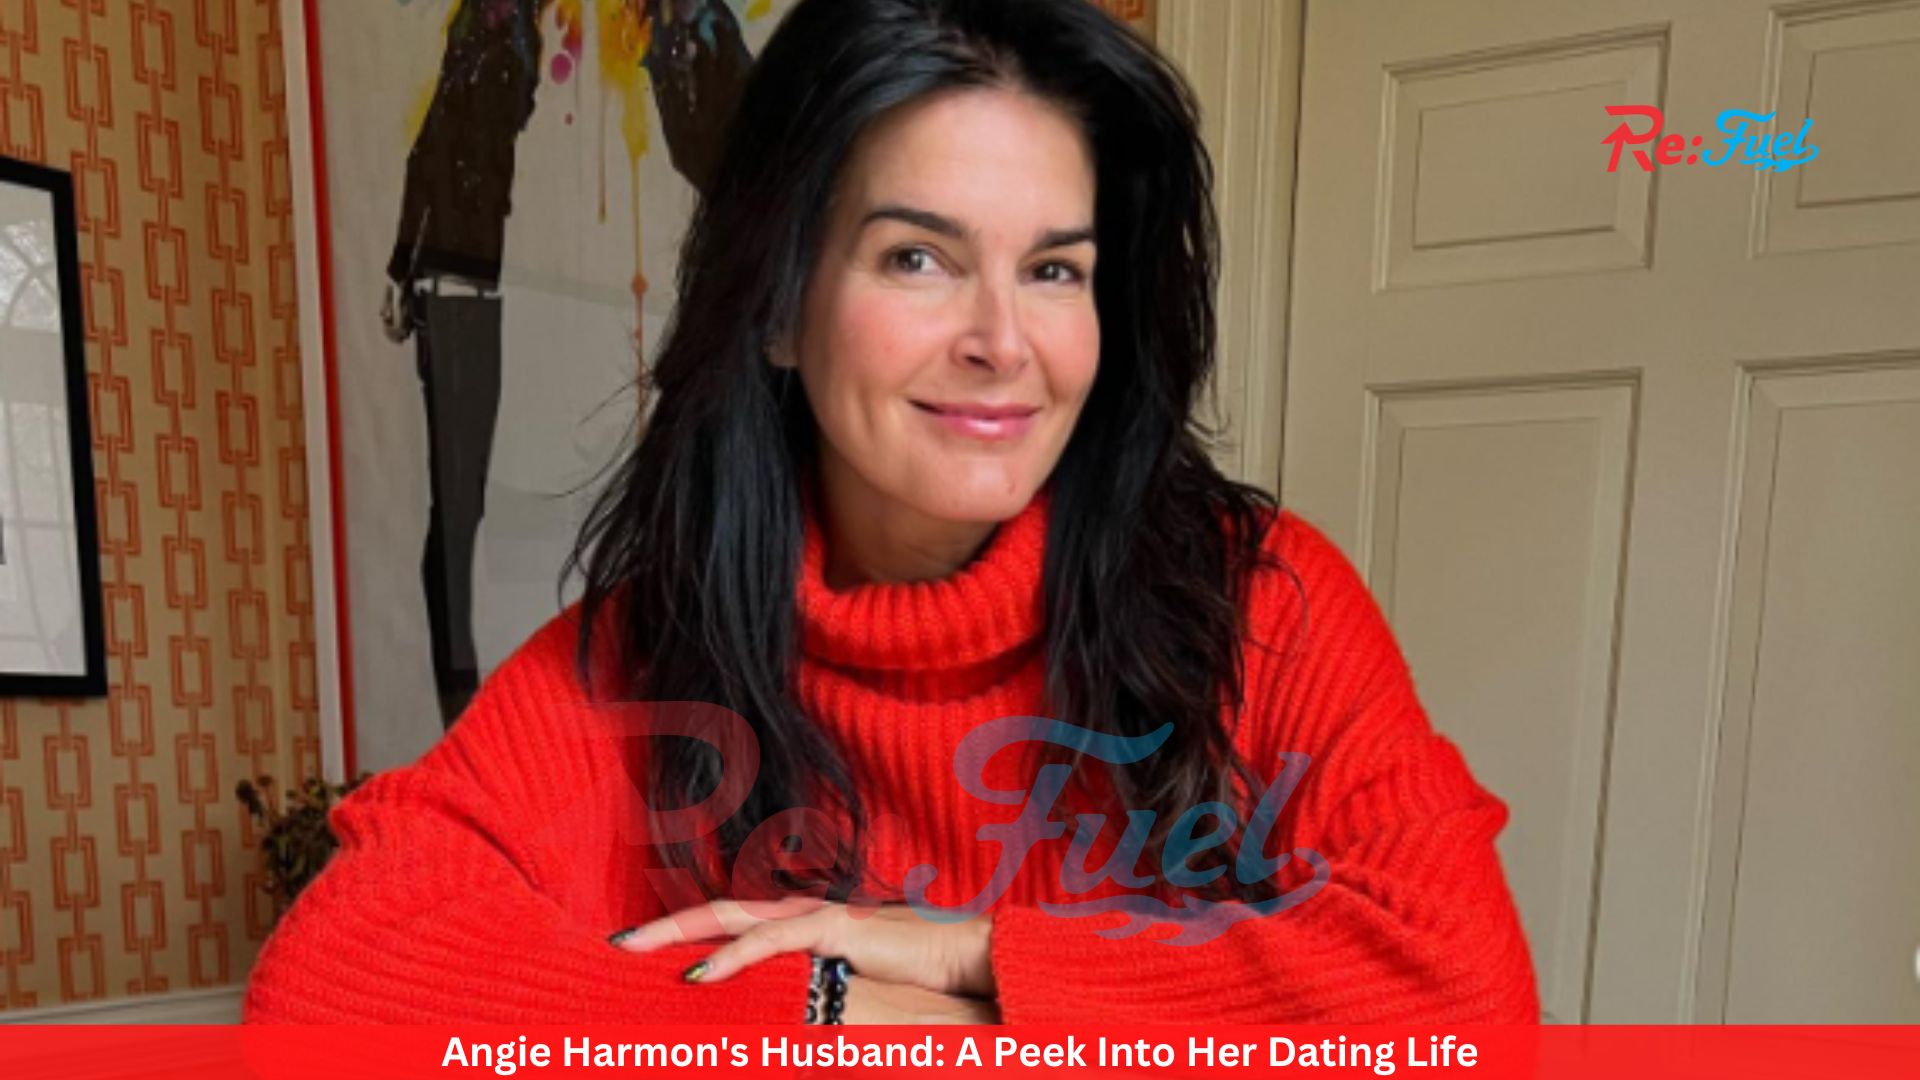 Angie Harmon's Husband: A Peek Into Her Dating Life